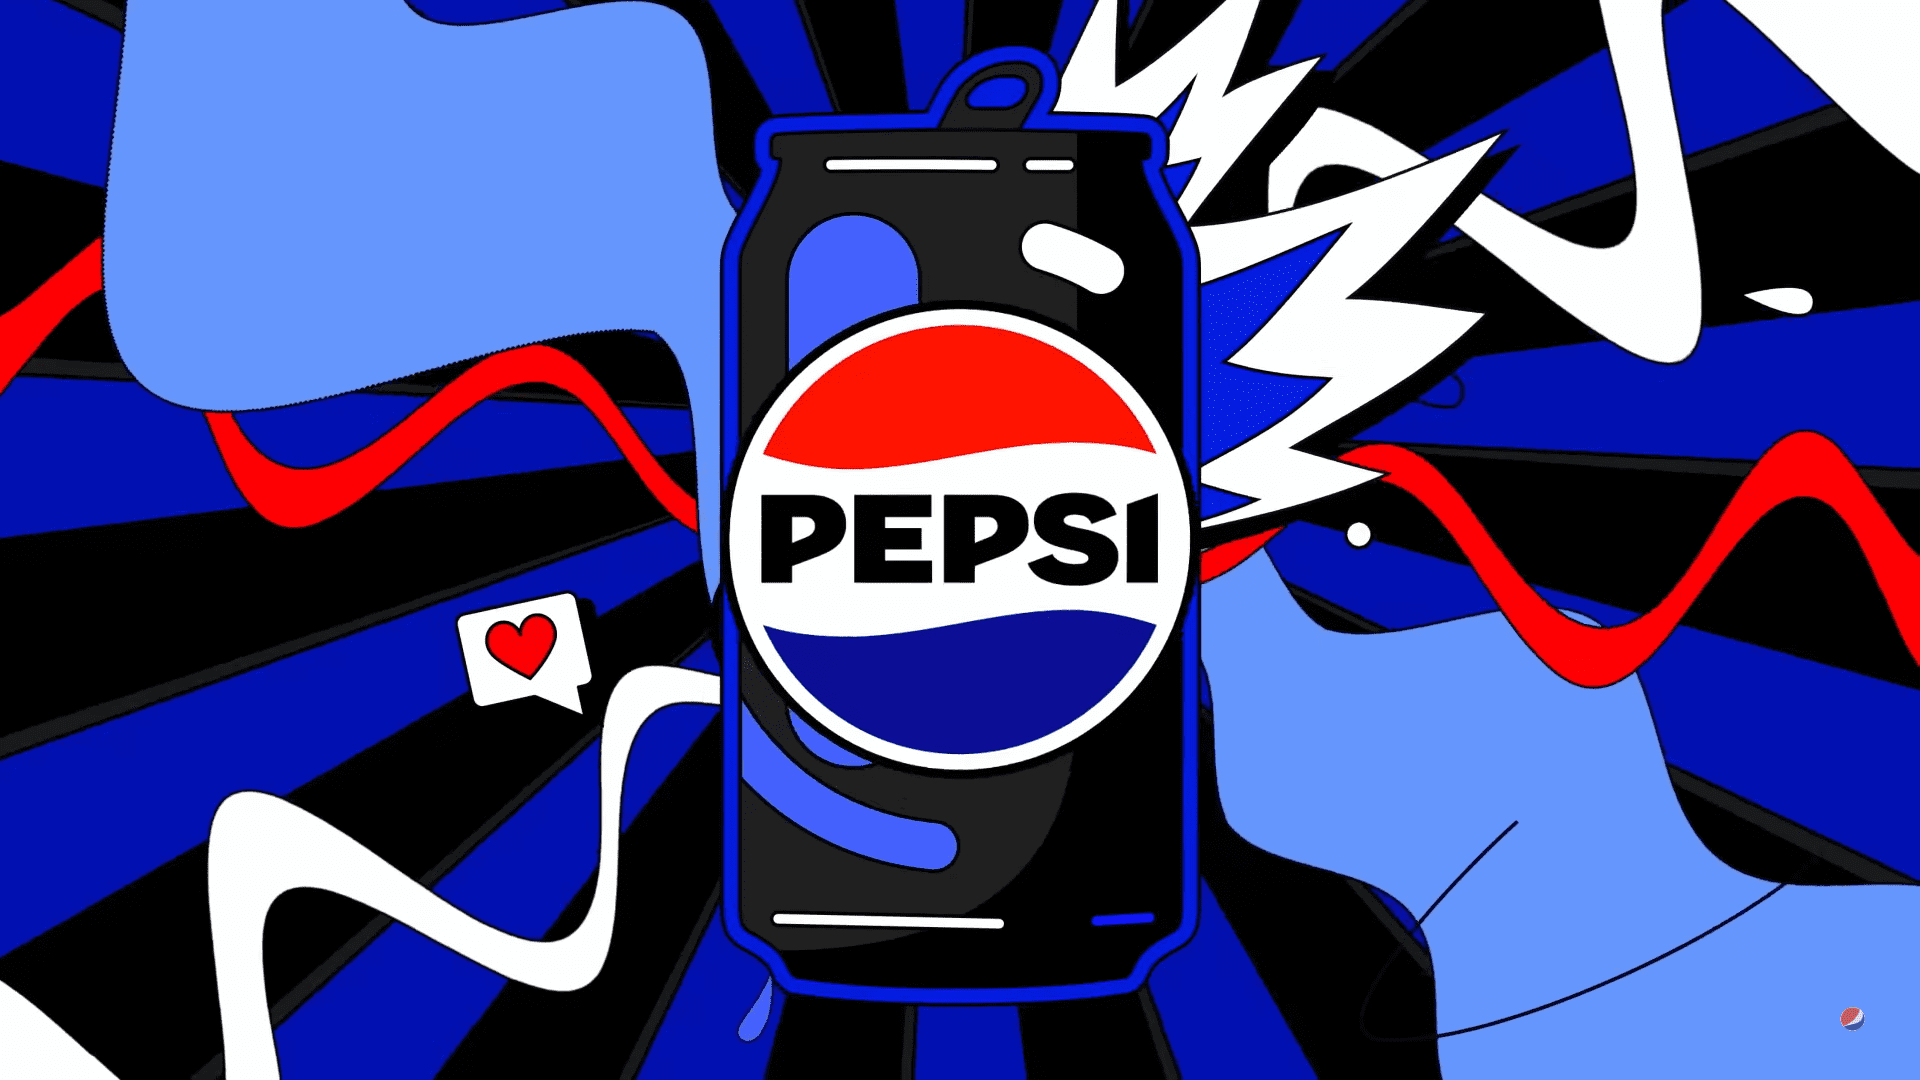 Pepsi Updates Its Logo for the First Time in 15 Years